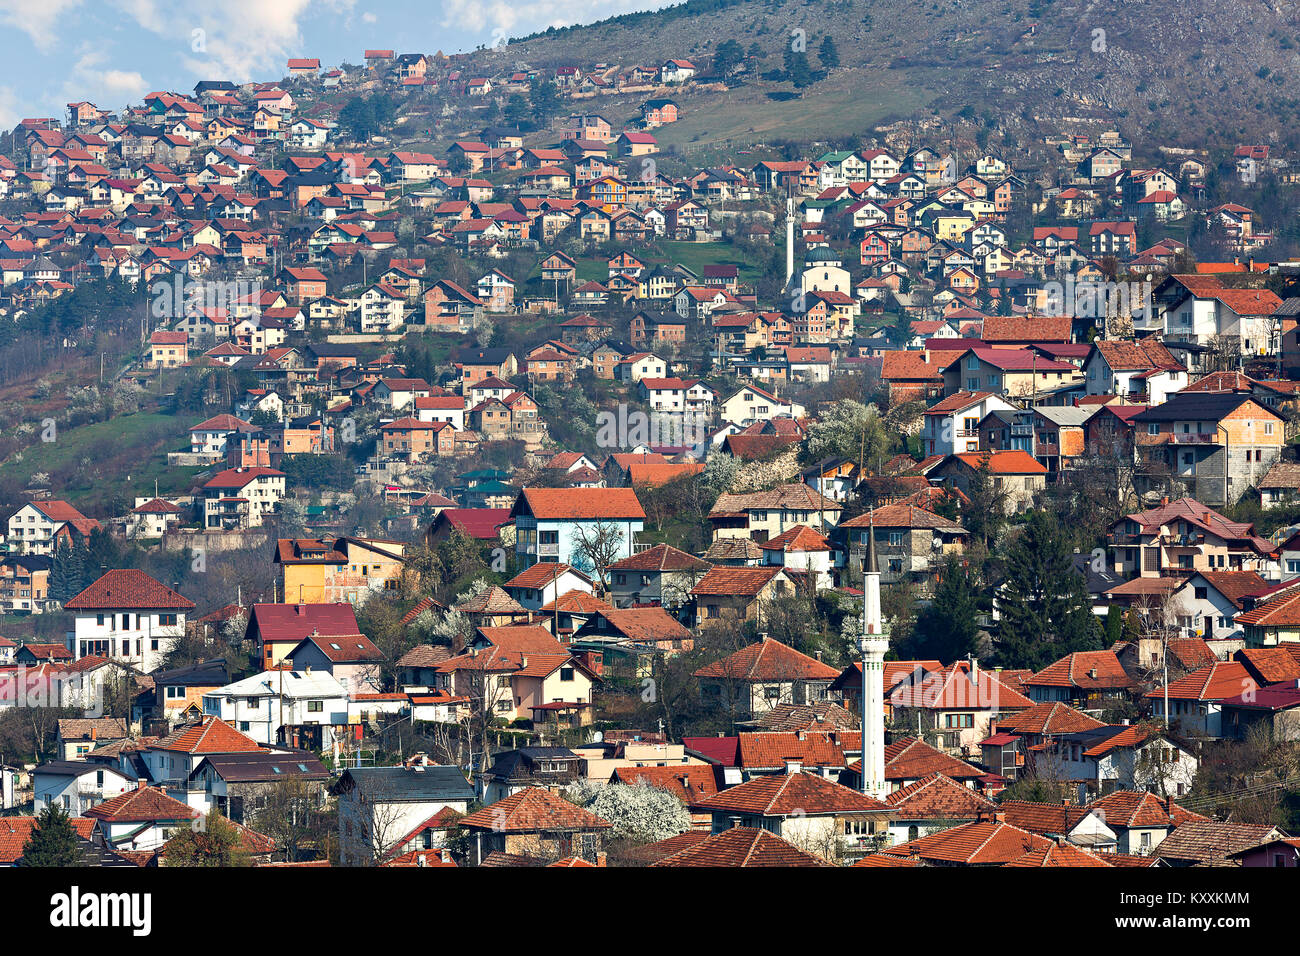 View over the houses with red roof tiles in Sarajevo, Bosnia and Herzegovina. Stock Photo